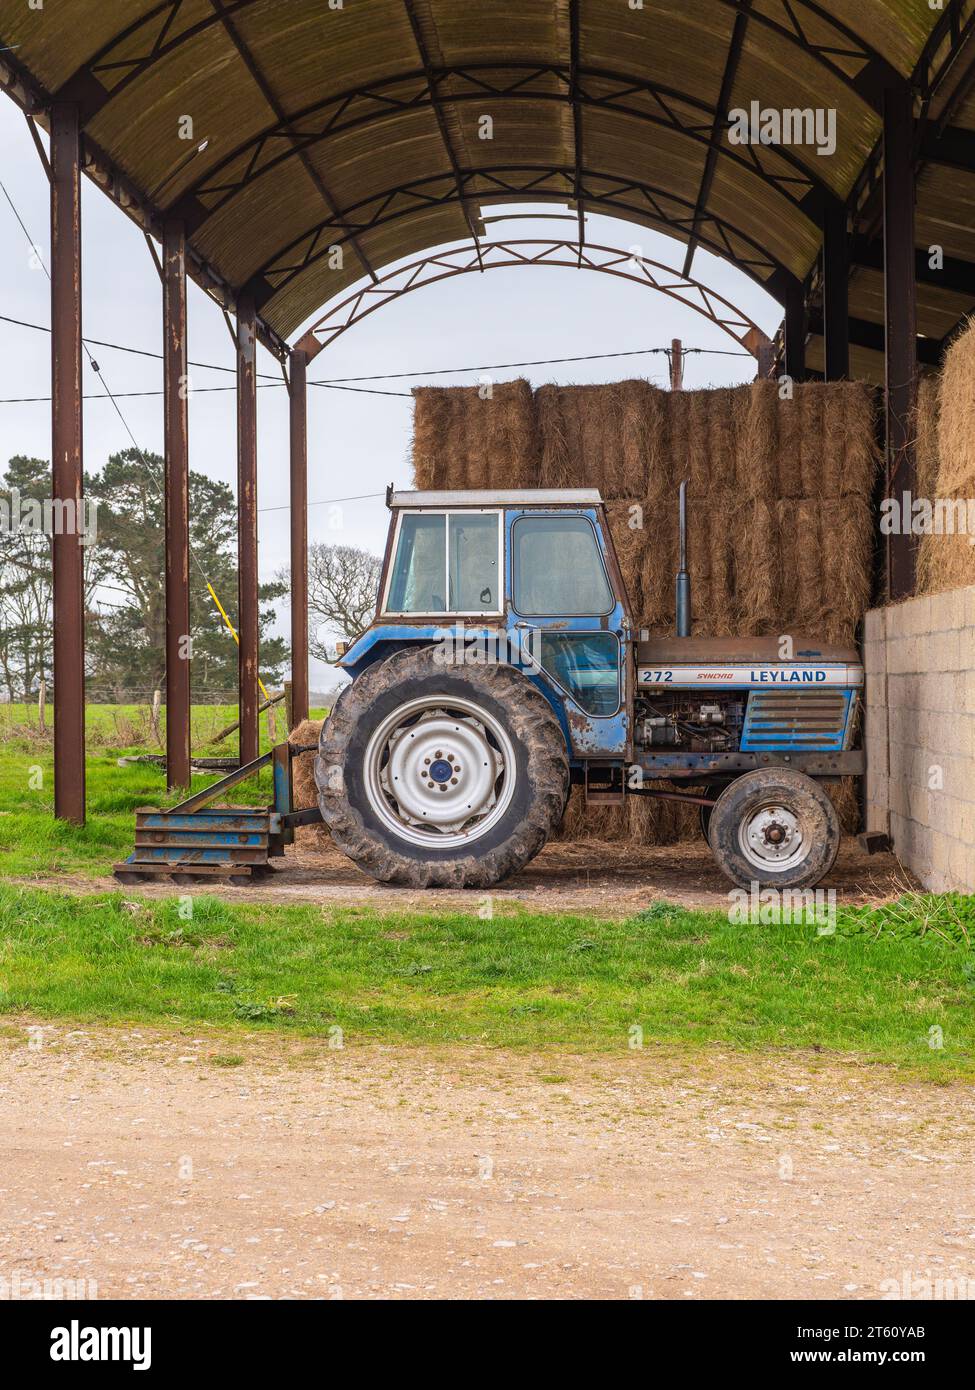 A old vintage leyland 272 tractor in blue, pictured in a open barn Stock Photo